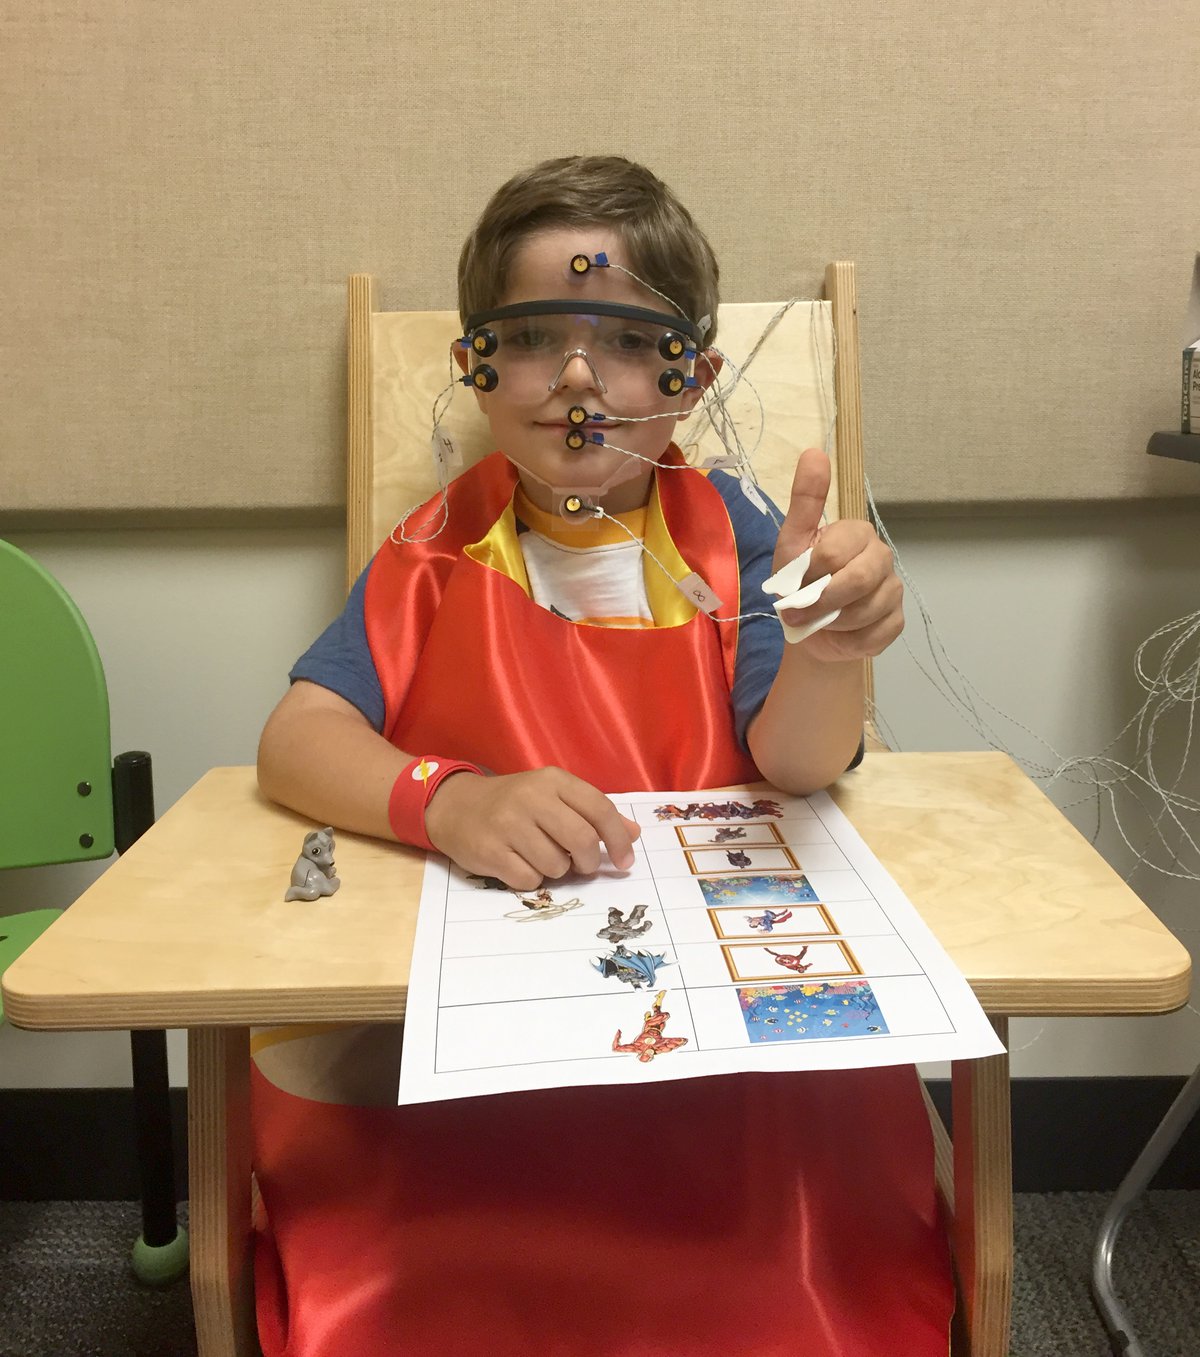 A child endergoing tests in the stuttering research lab.